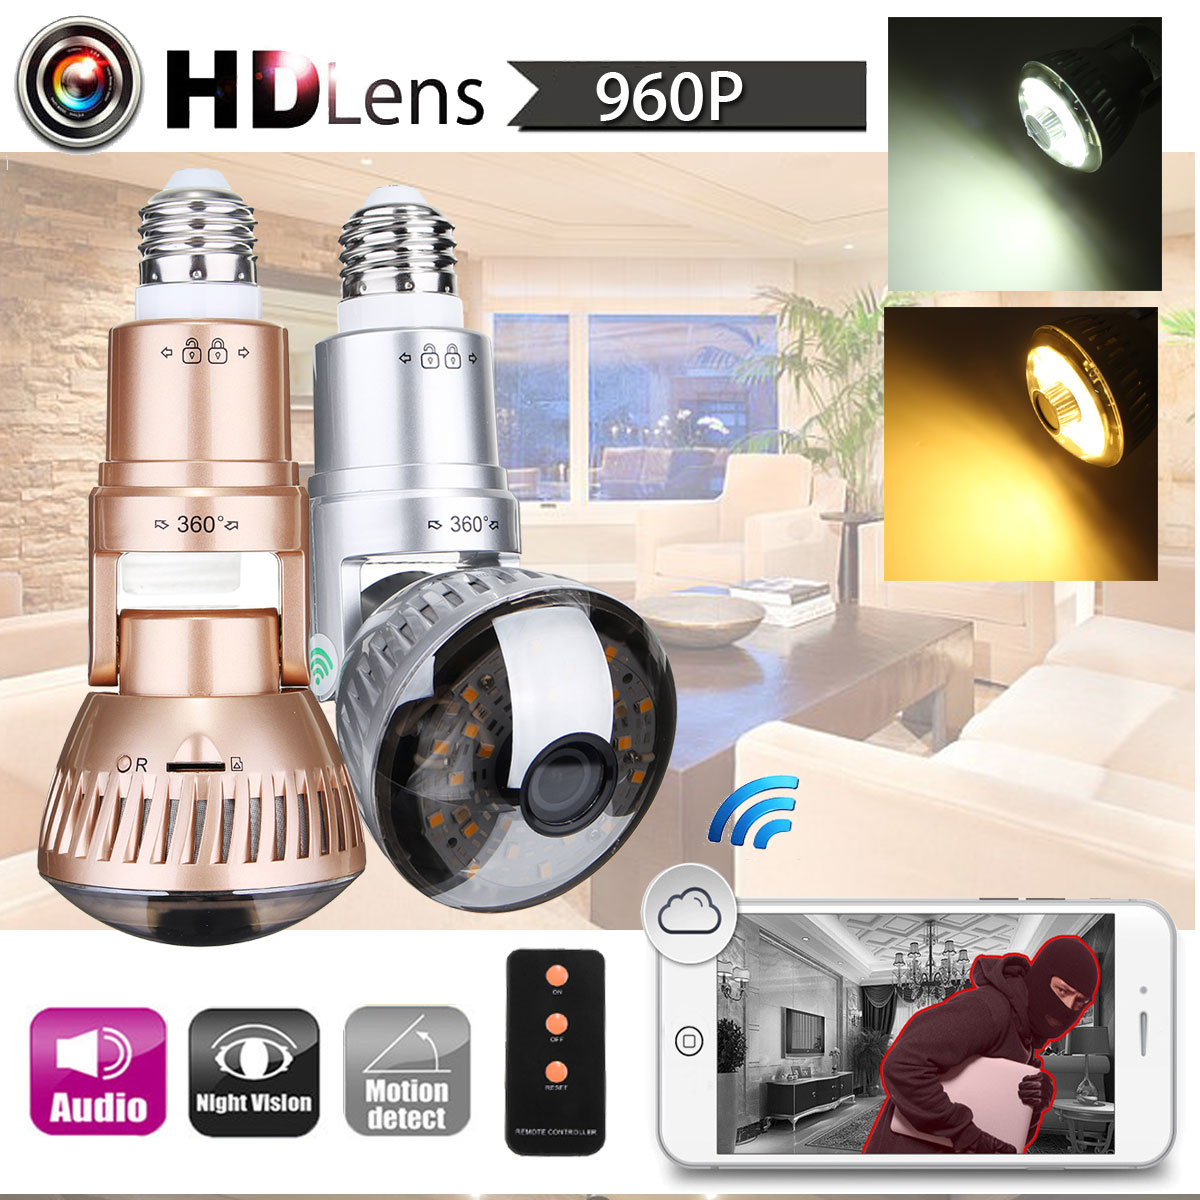 3.6mm Wireless Mirror Bulb Security Camera DVR WIFI LED Light IP Camera Motion Detection 